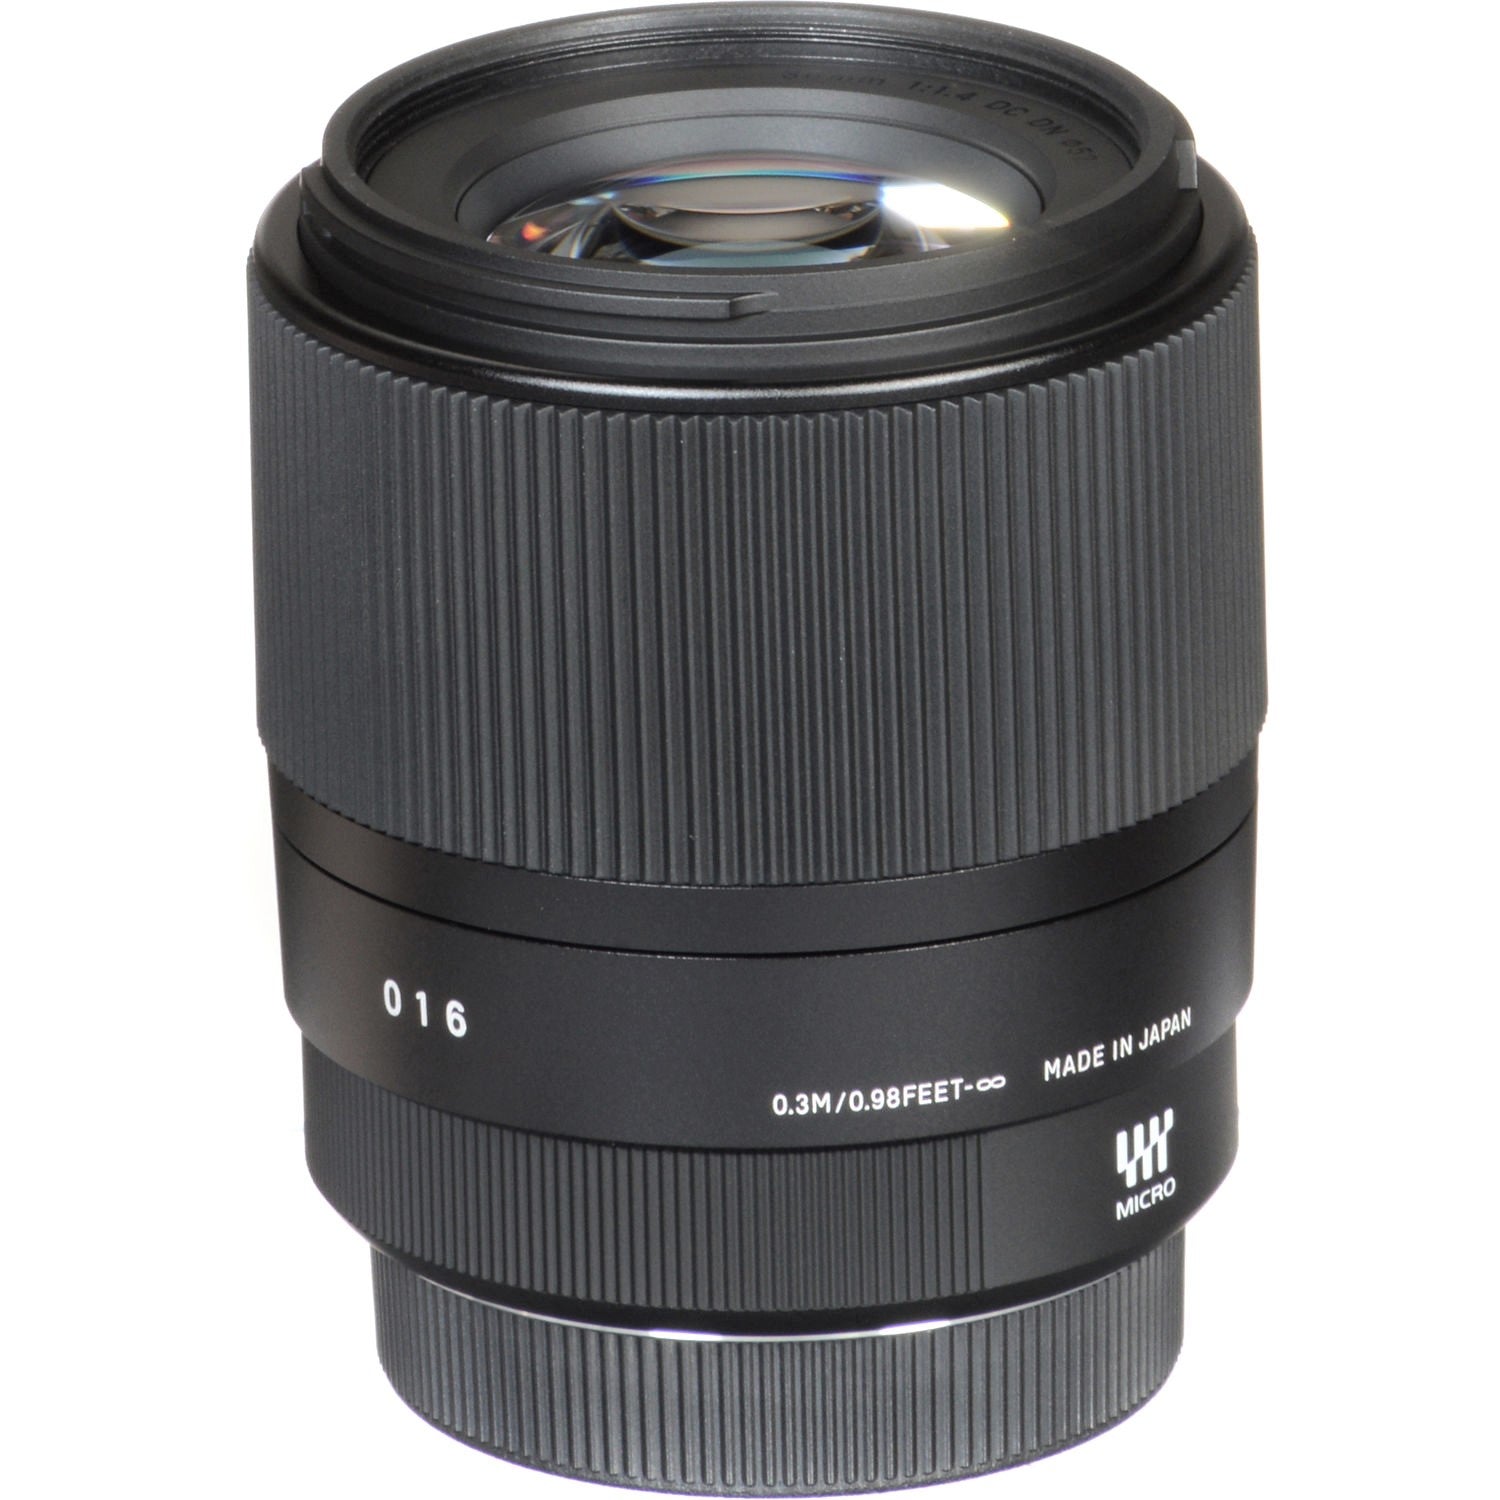 Sigma 30mm F1.4 Contemporary DC DN Lens for Micro 4/3